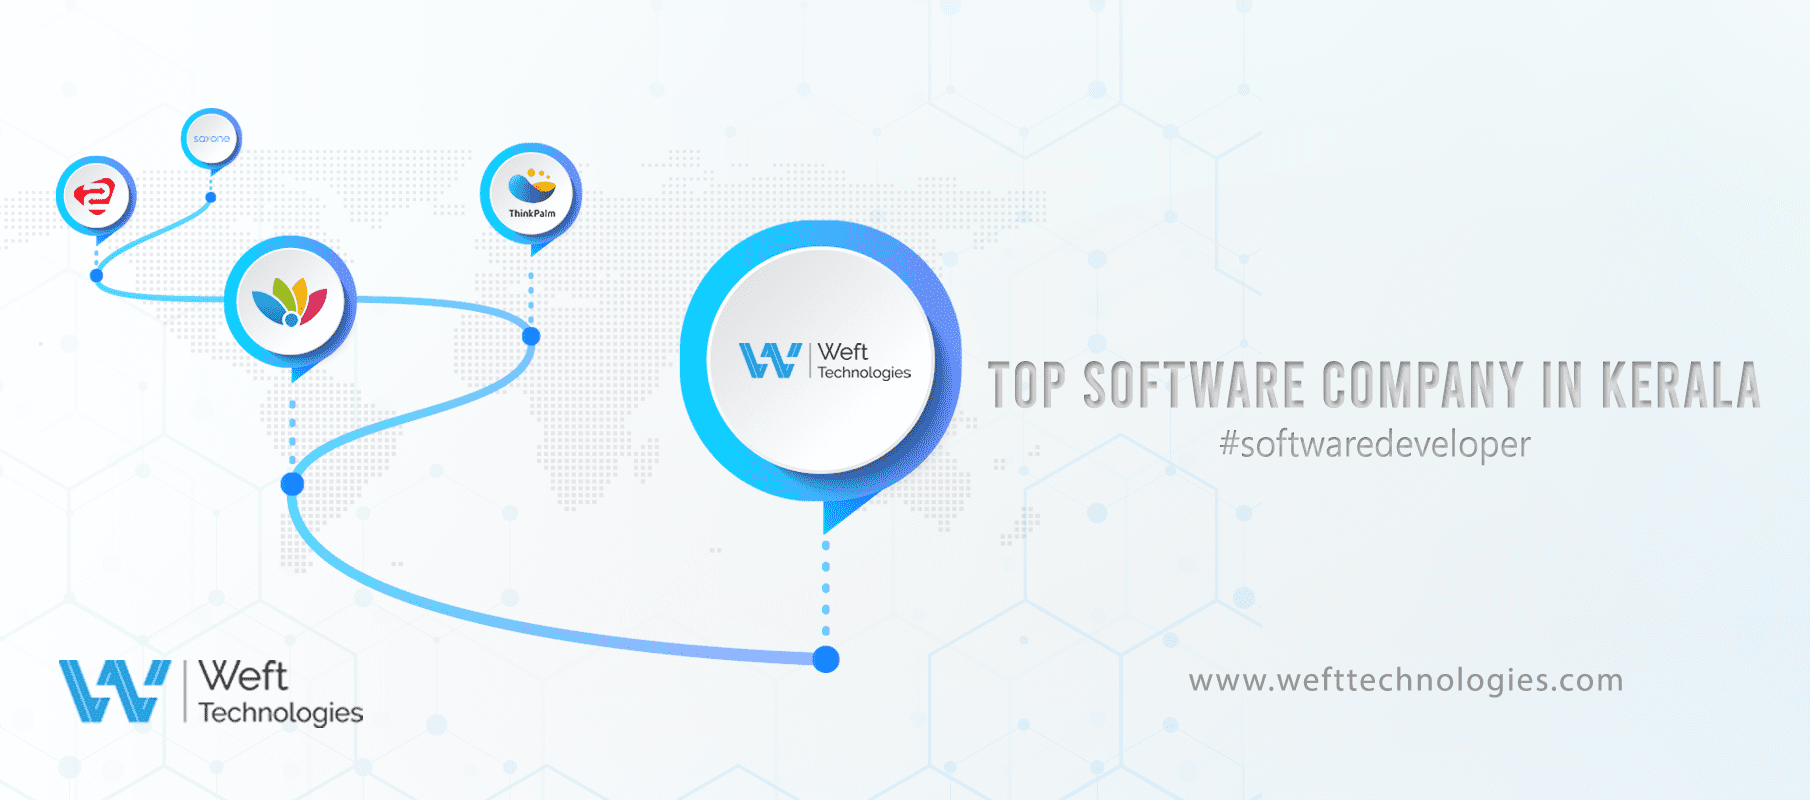 Which is the Top Software Company in Kerala